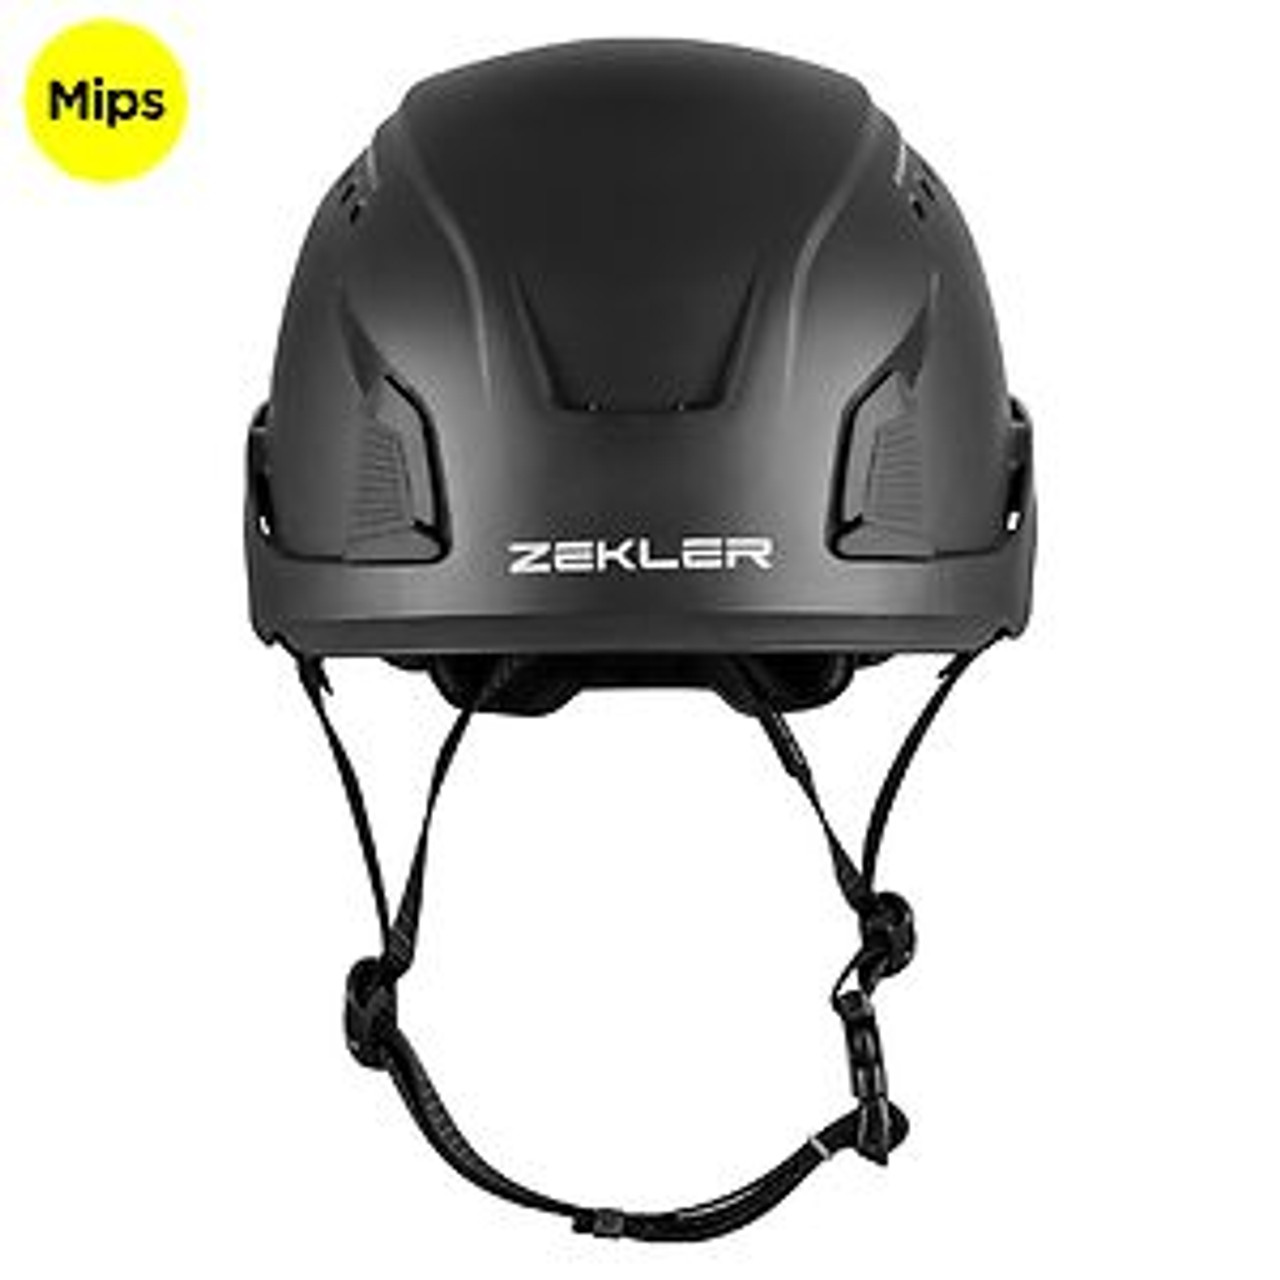 ZEKLER Helmet | ZONE Grey Technical Safety Helmet  for MIPS, Rope Access, Electricians, Construction, Workshops and Machinery Operators